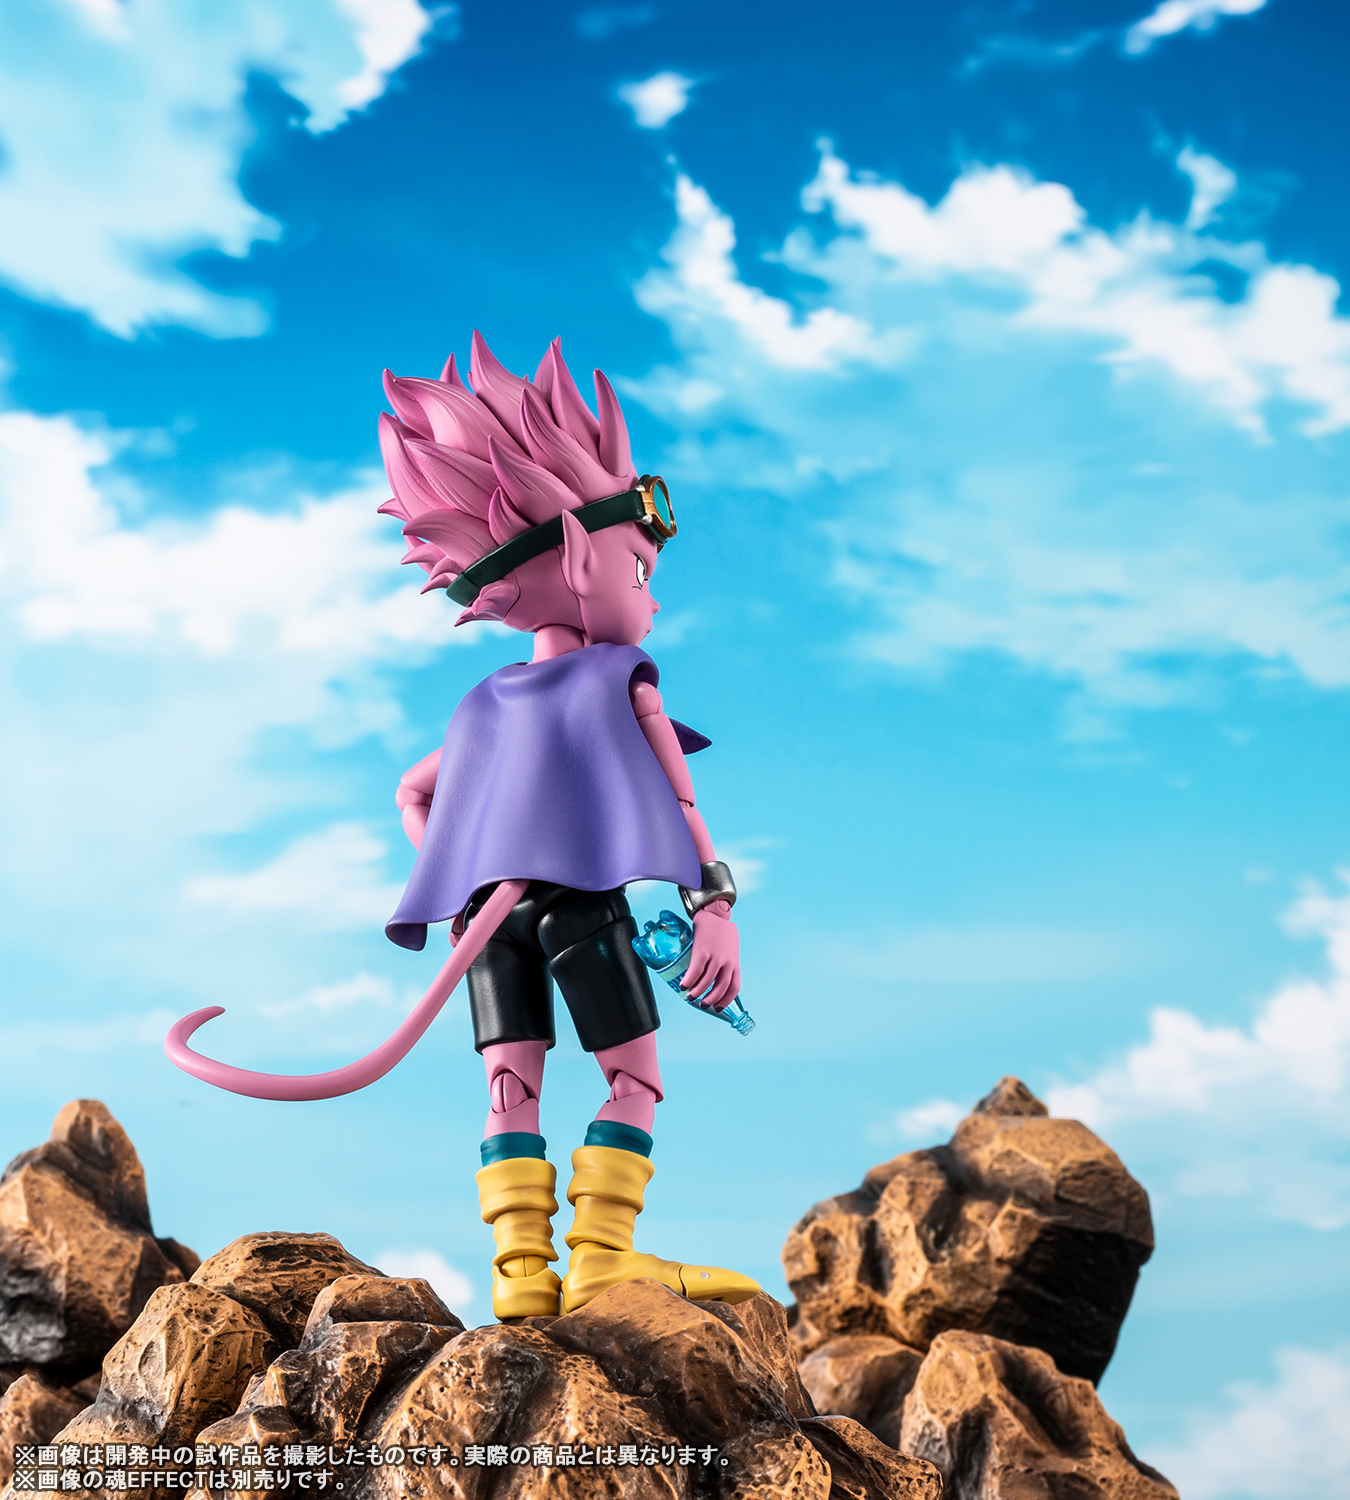 Images from "S.H.Figuarts BEELZEBUB